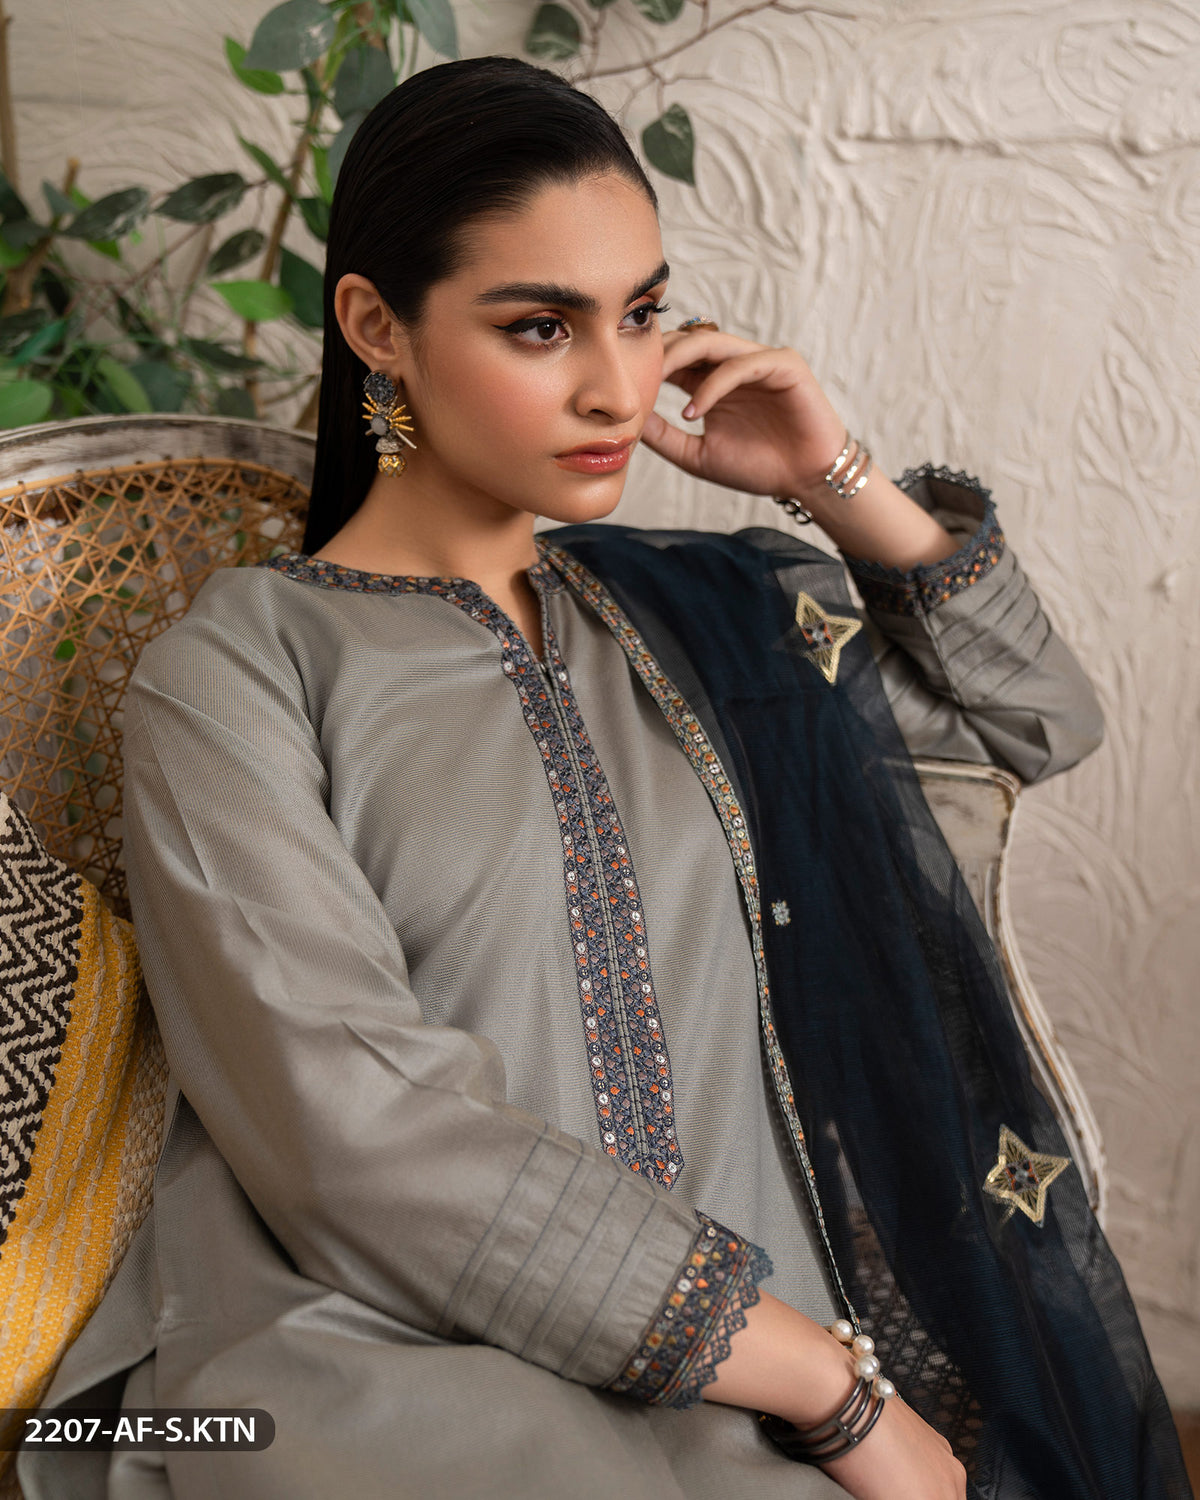 Chambray Katan Embroidered Suit